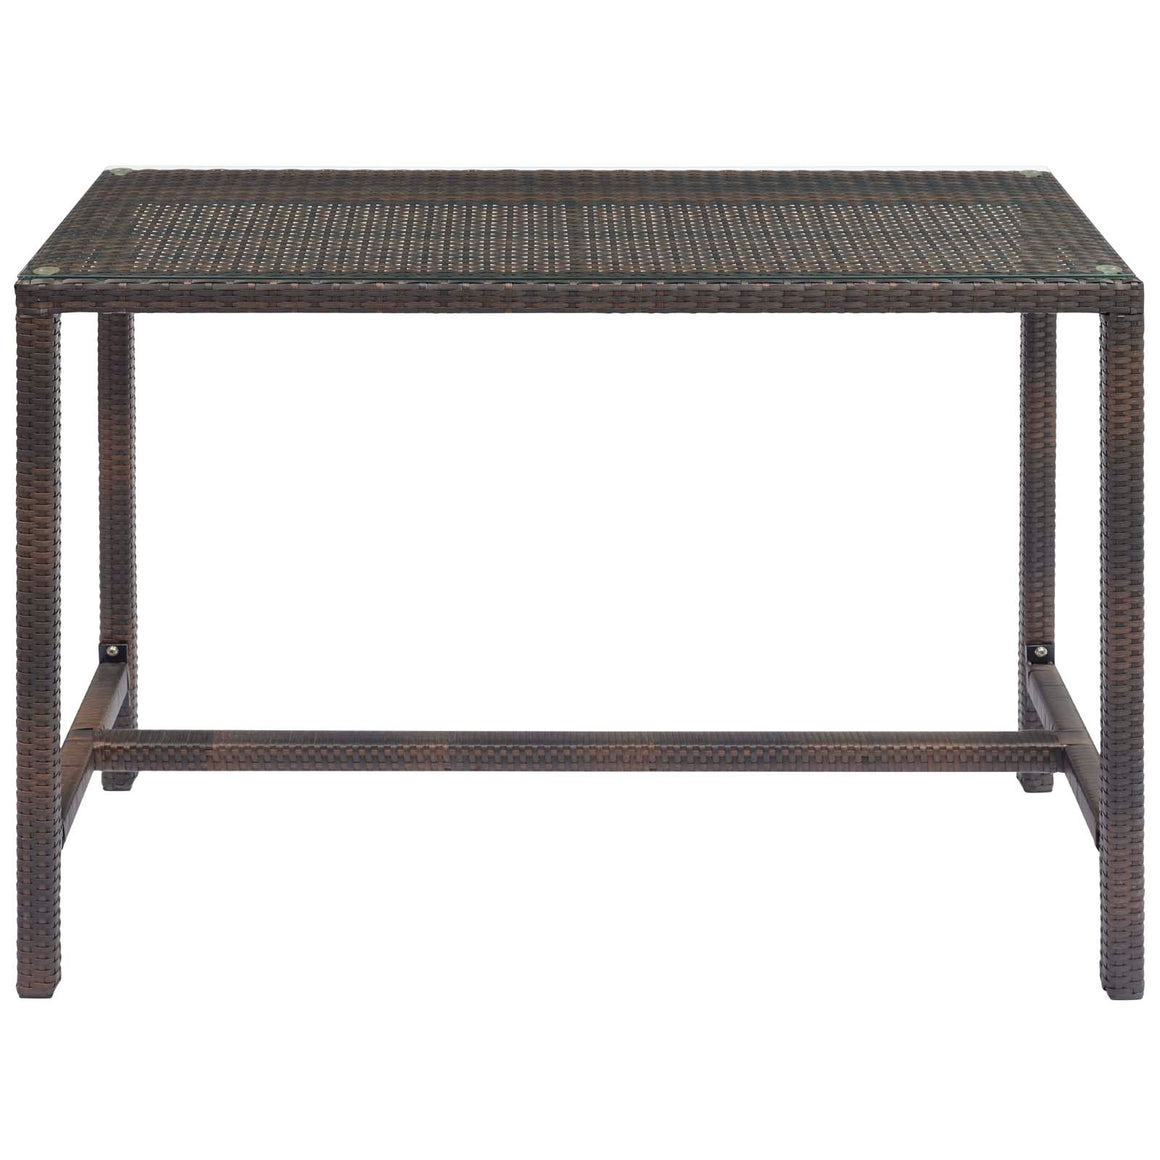 Conduit Outdoor Patio Wicker Rattan Large Bar Table in Brown